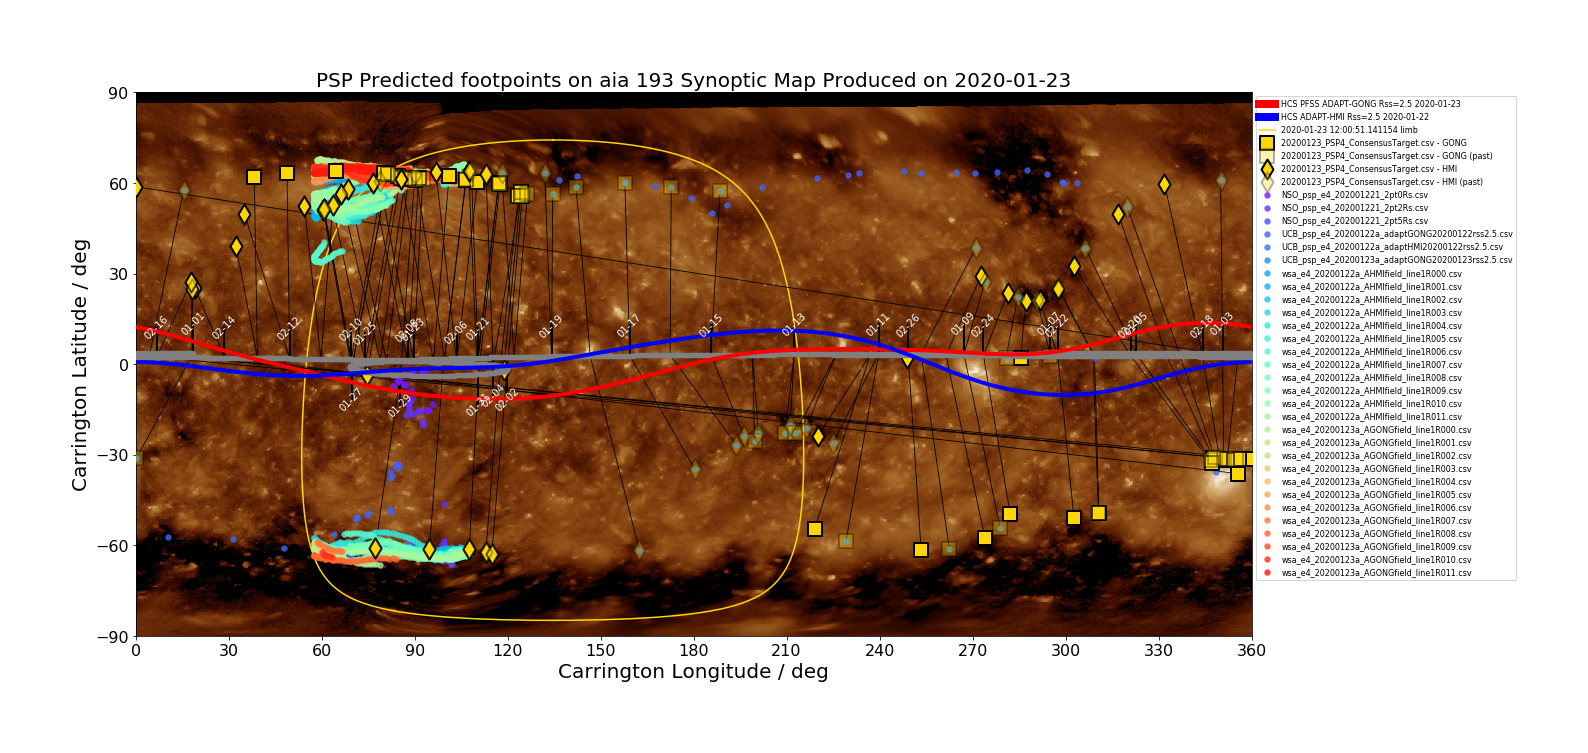 Heliographic Carrington footpoints of PSP: the same data as in Figure 1 but in Carrington coordinates (latitude-longitude) and with error bars in latitude and longitude for ensemble predictions. Also shown in this plot is the most recent GONG-ADAPT current sheet generated by the UCB model (red), and the datestamped PSP trajectory in carrington coordinates (grey) (Courtesy of Sam Badman; SDO/AIA 193A synoptic map produced by David Stansby).